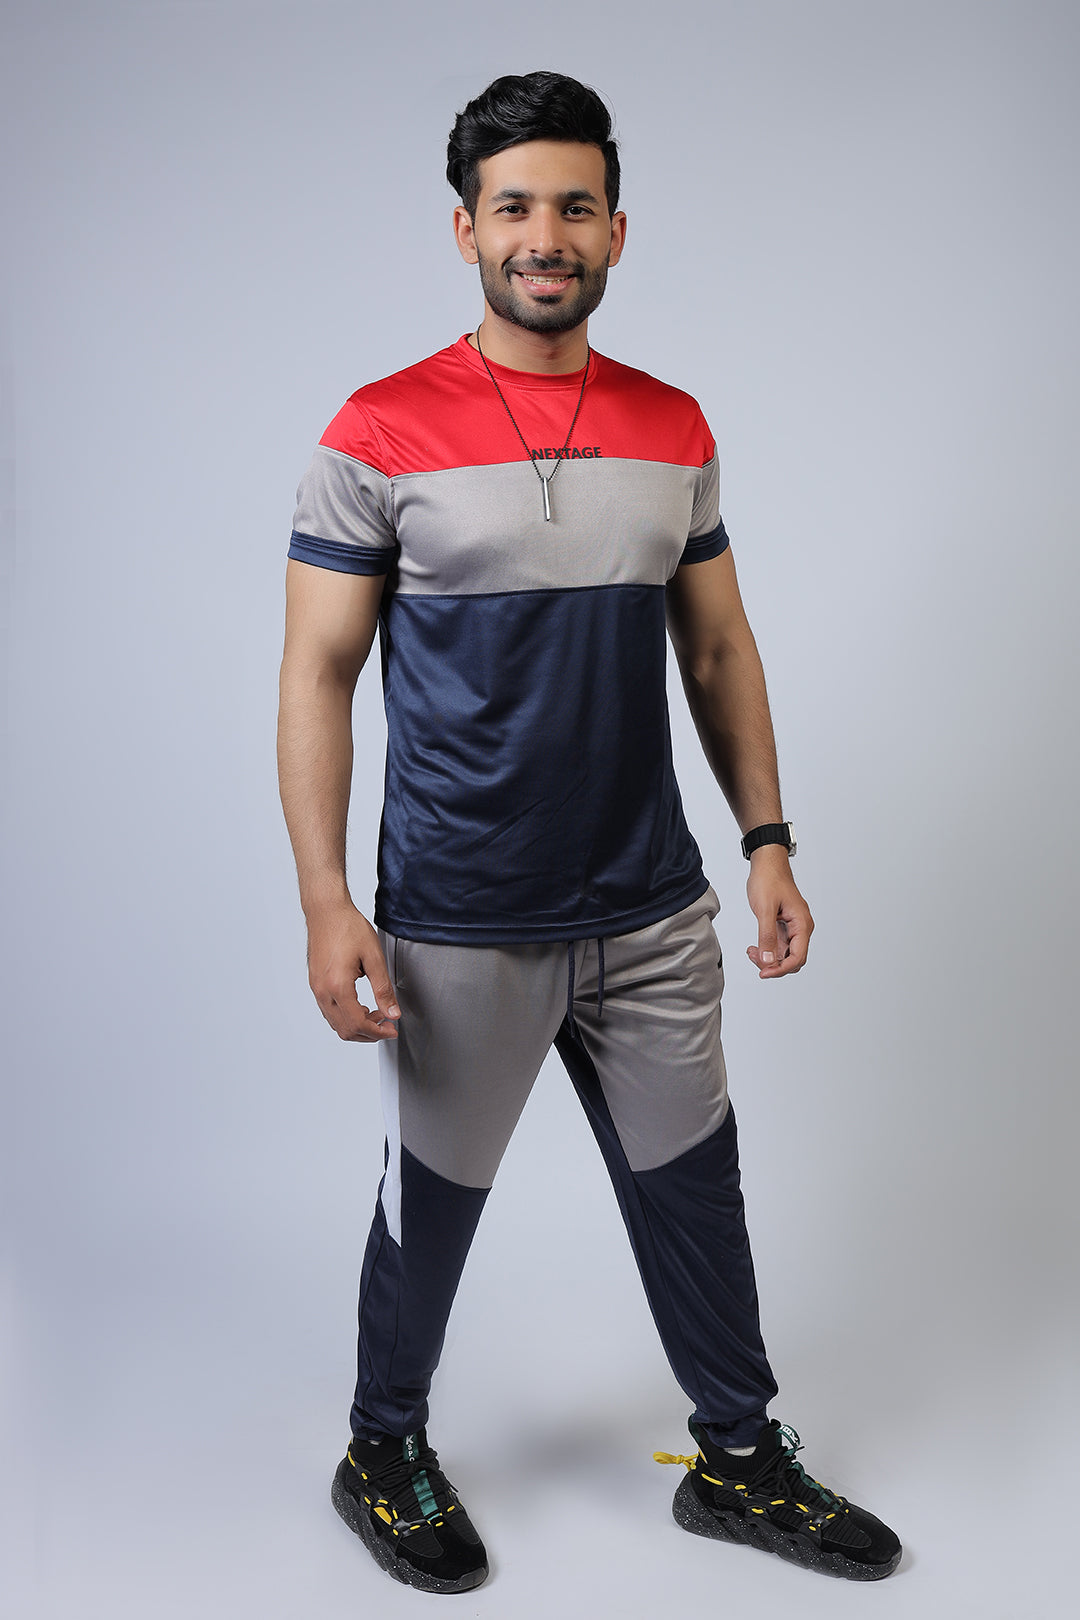 Dry fit summer sports tracksuits,